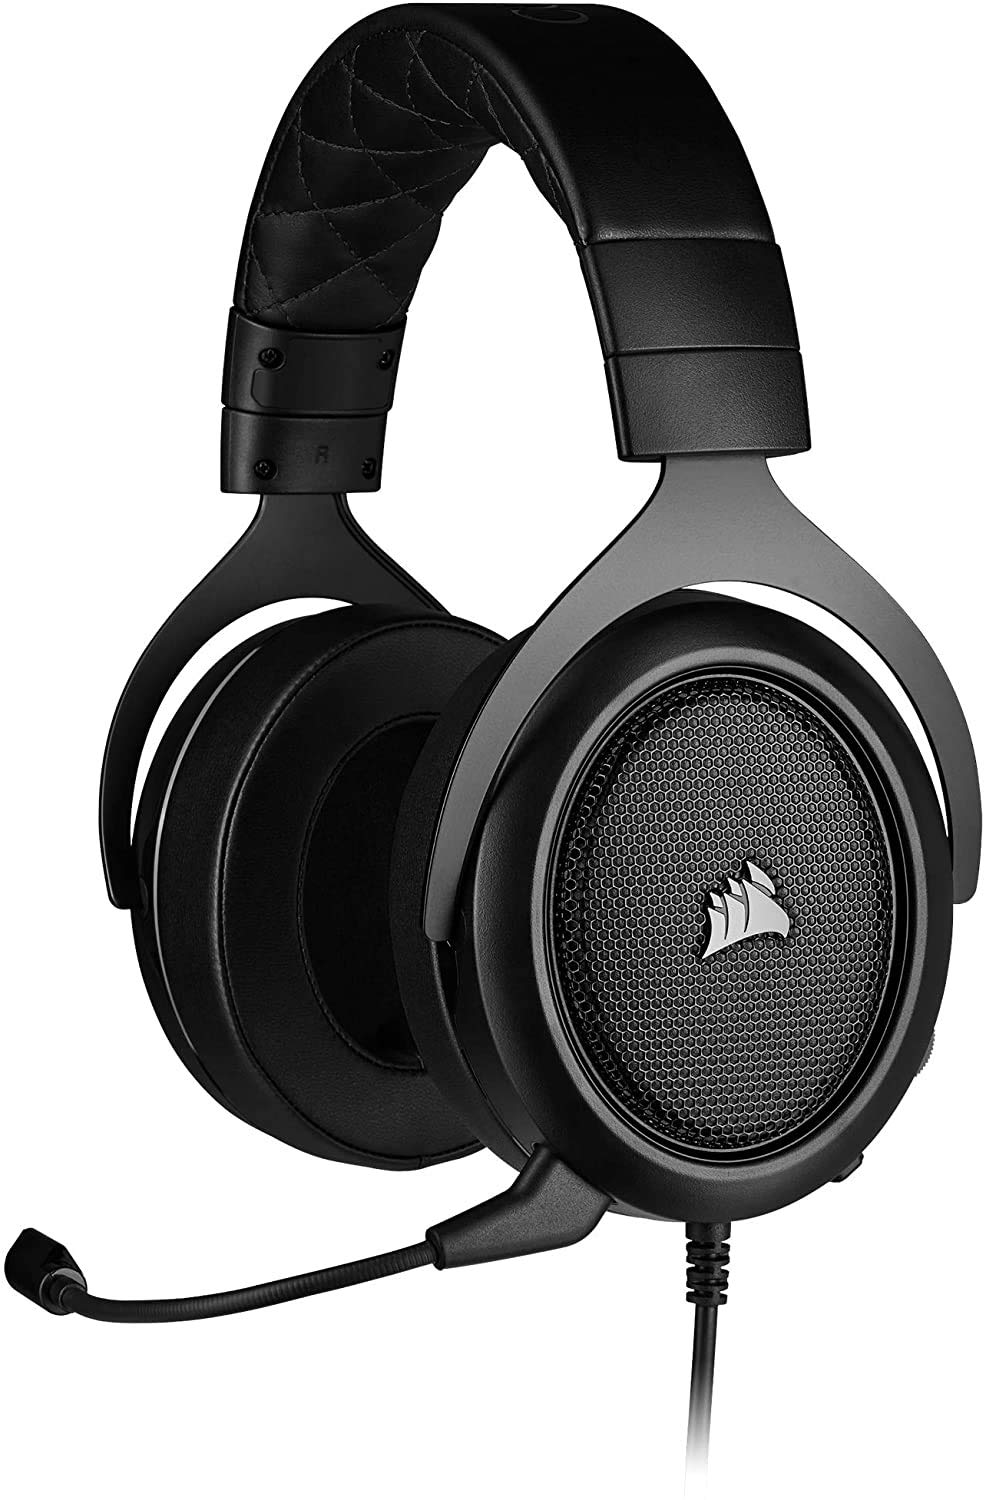 (Open Box) Corsair Hs50 Pro Wired On Ear Headphones with Mic (Carbon Black) (Grade - A+)